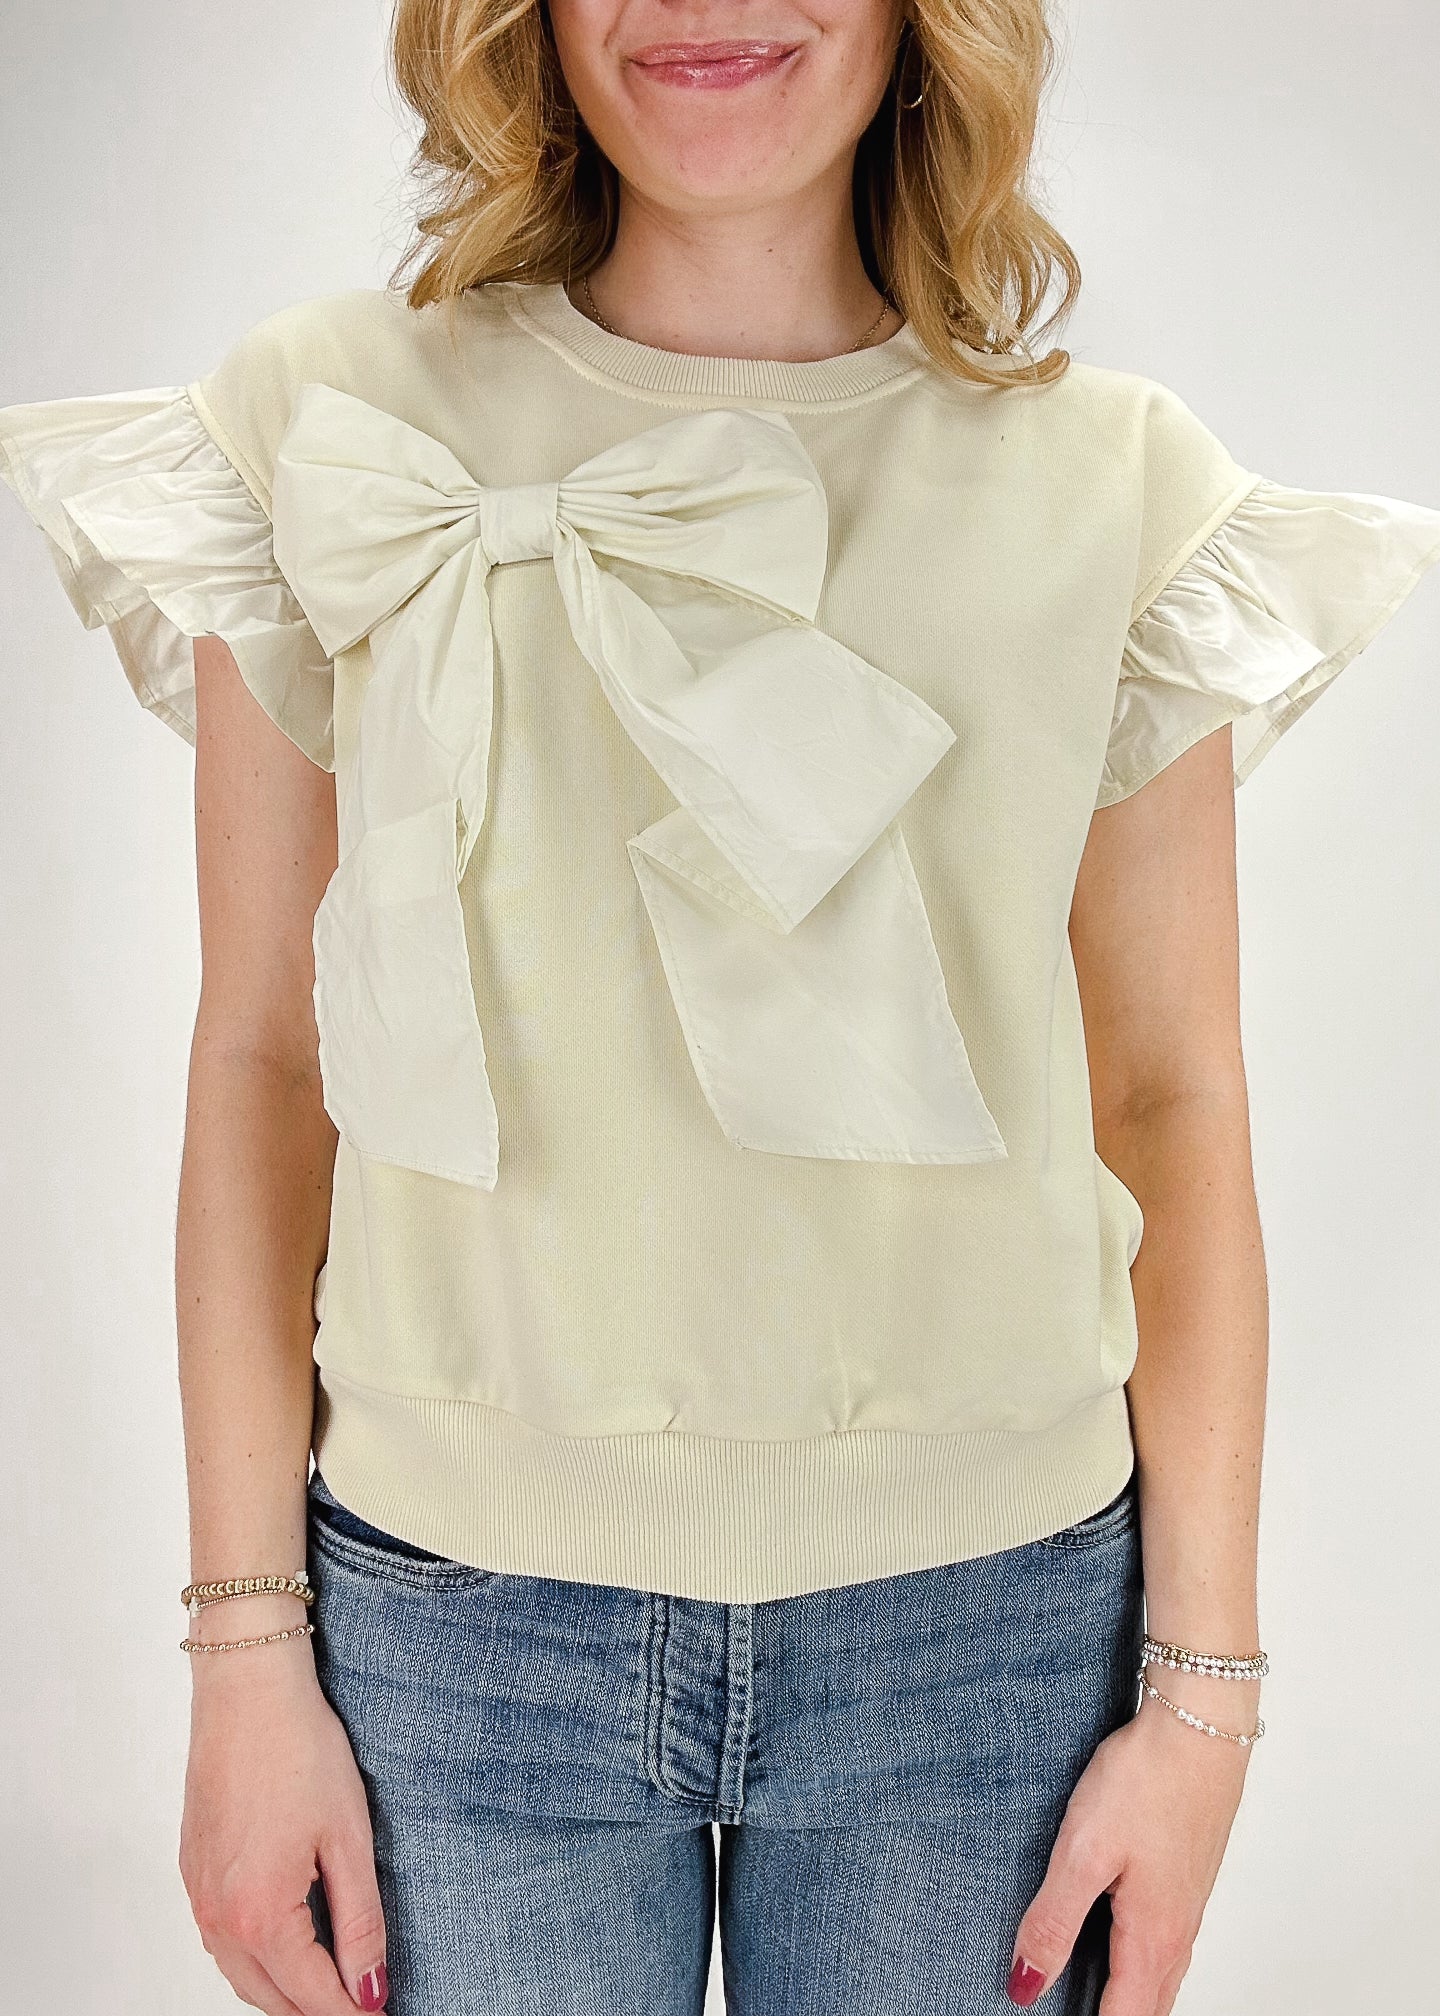 Mabel Bow Top